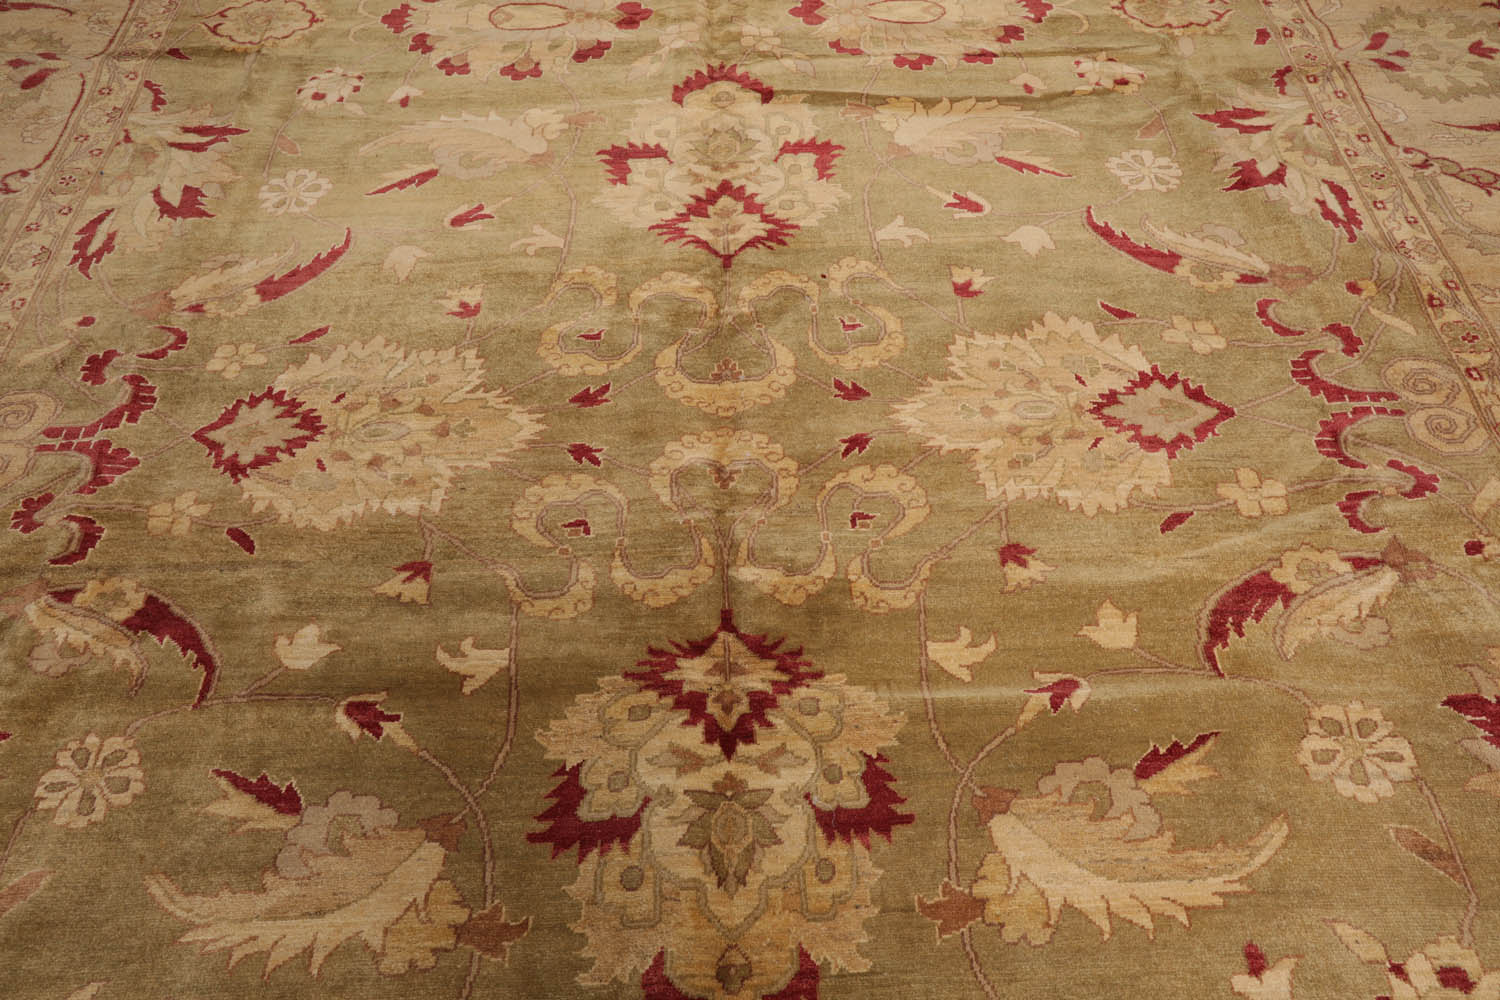 Gair Palace Pistacchio, Beige Hand Knotted 100% Wool Chobi Peshawar Traditional Oriental Area Rug